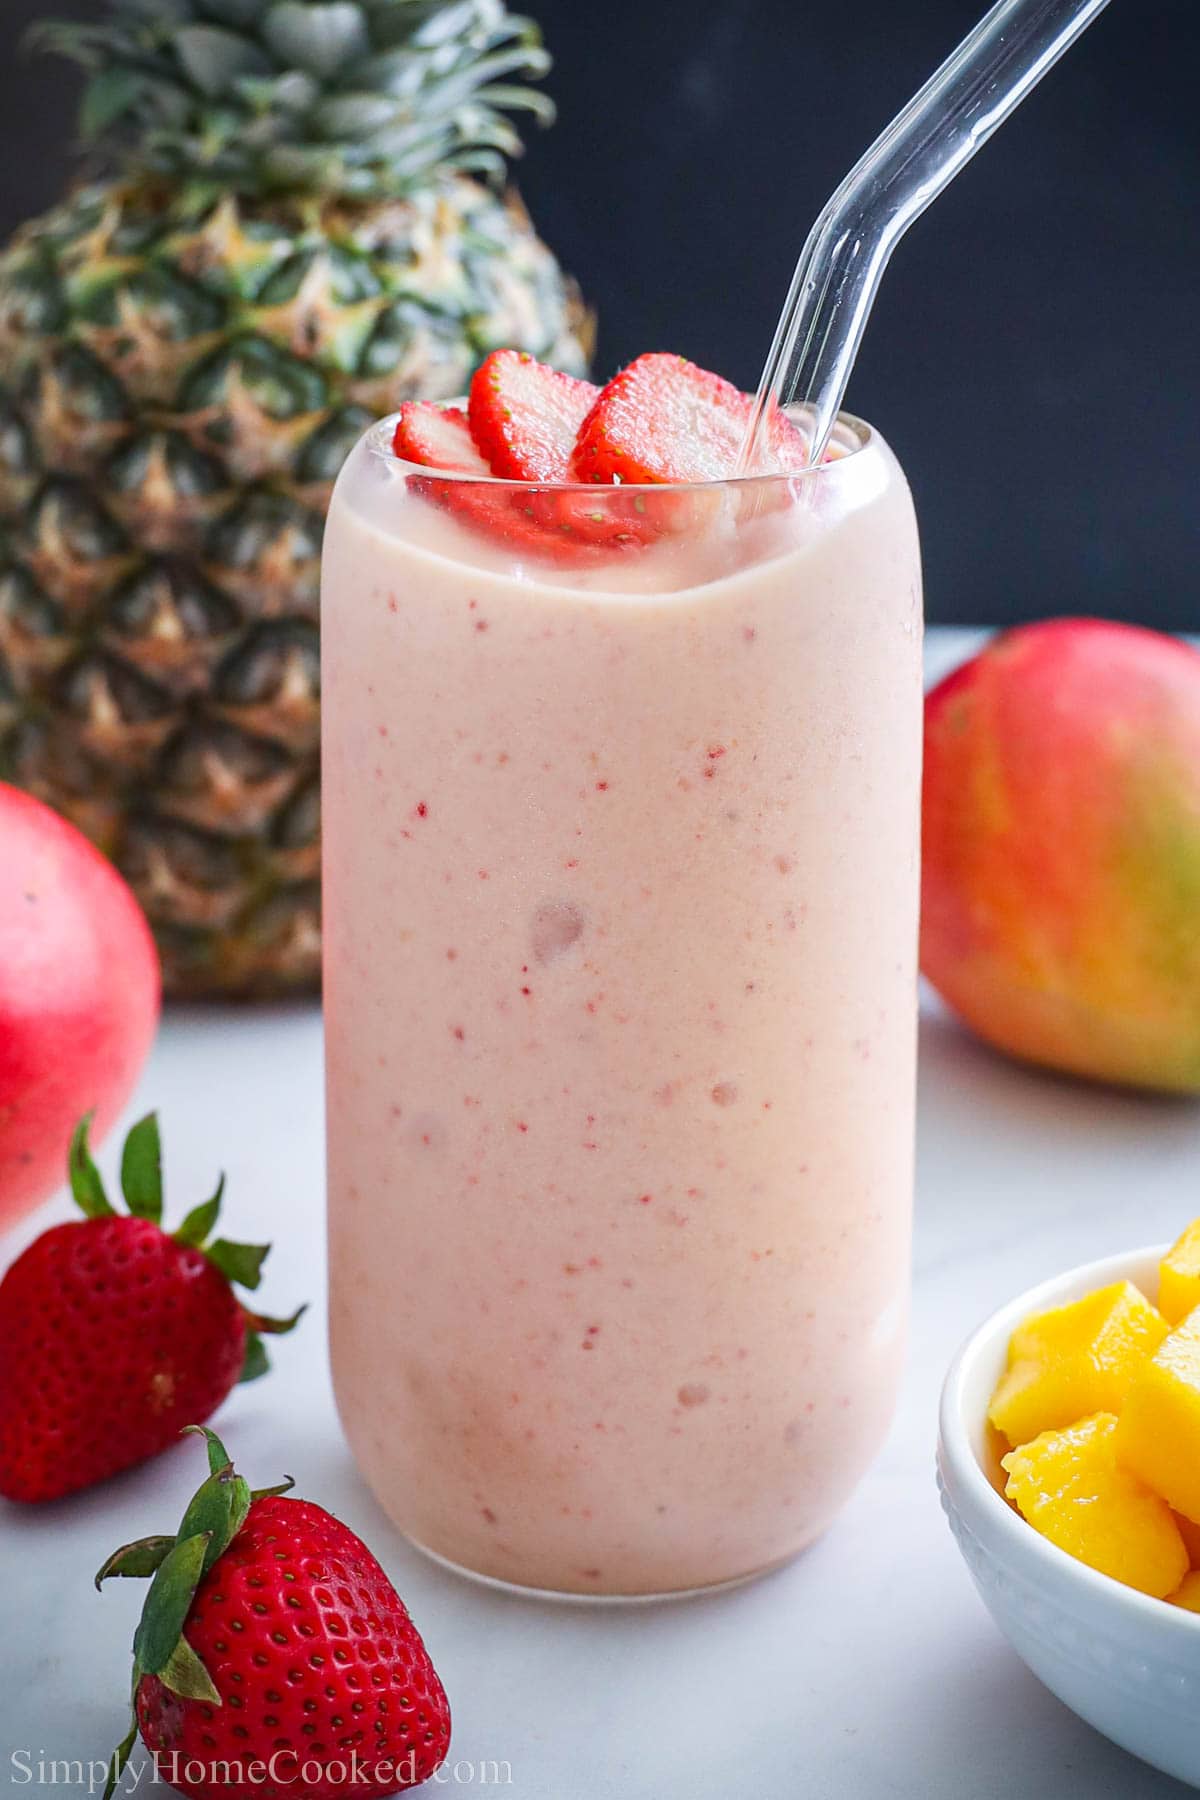 Tropical Smoothie in a glass with a straw and strawberry slices on top, mangos, pineapple, and strawberry nearby.